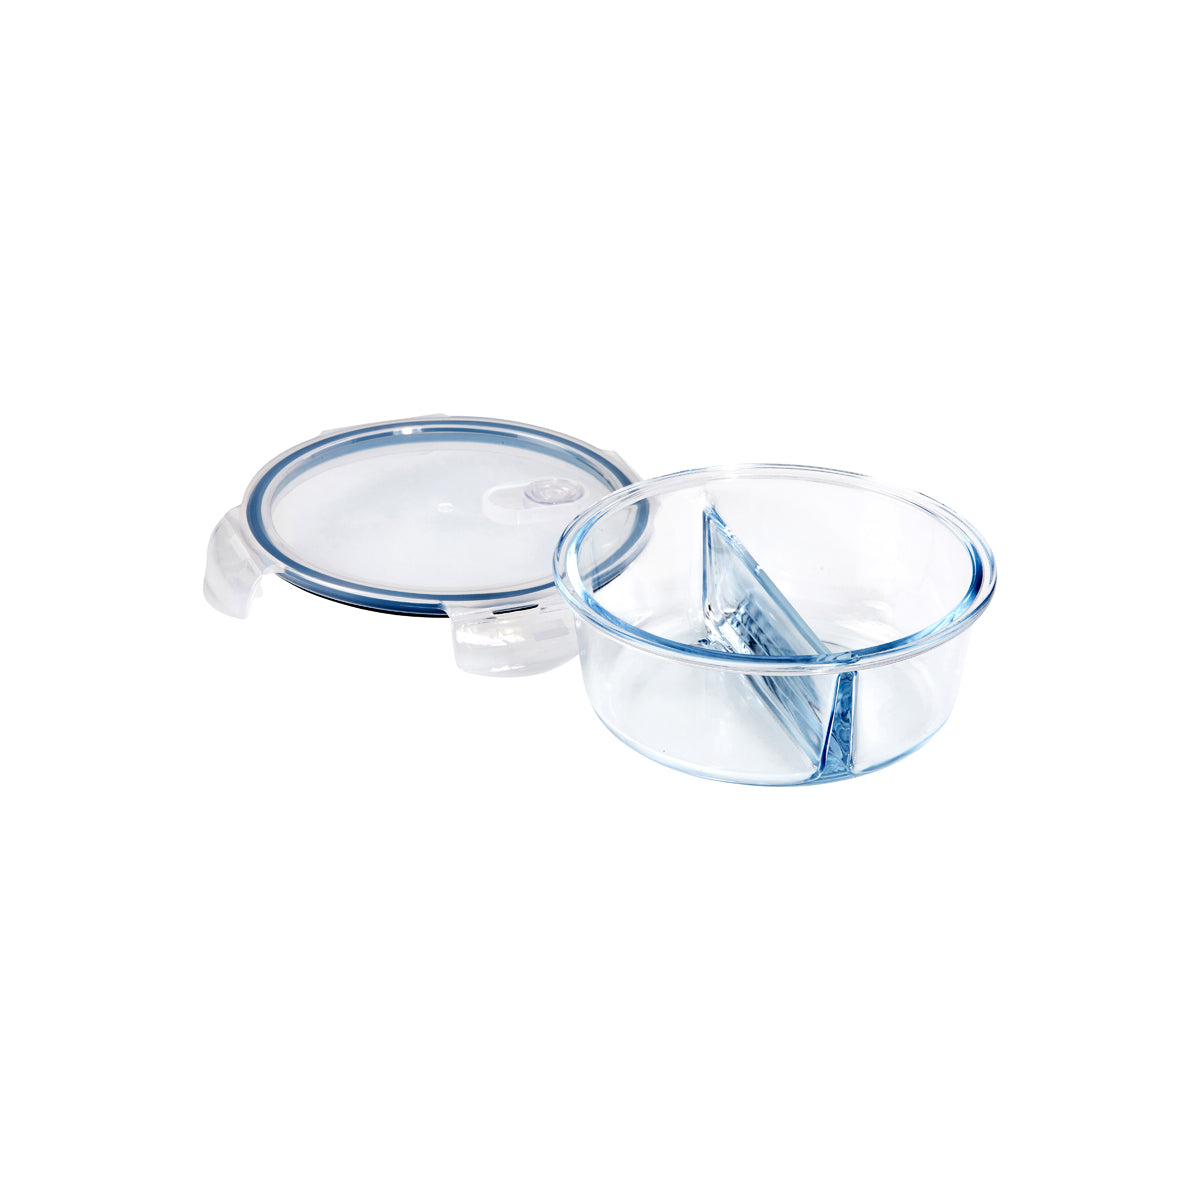 ETR48143 Eterna Glass Containers 2 Divider Round 950ml Tomkin Australia Hospitality Supplies